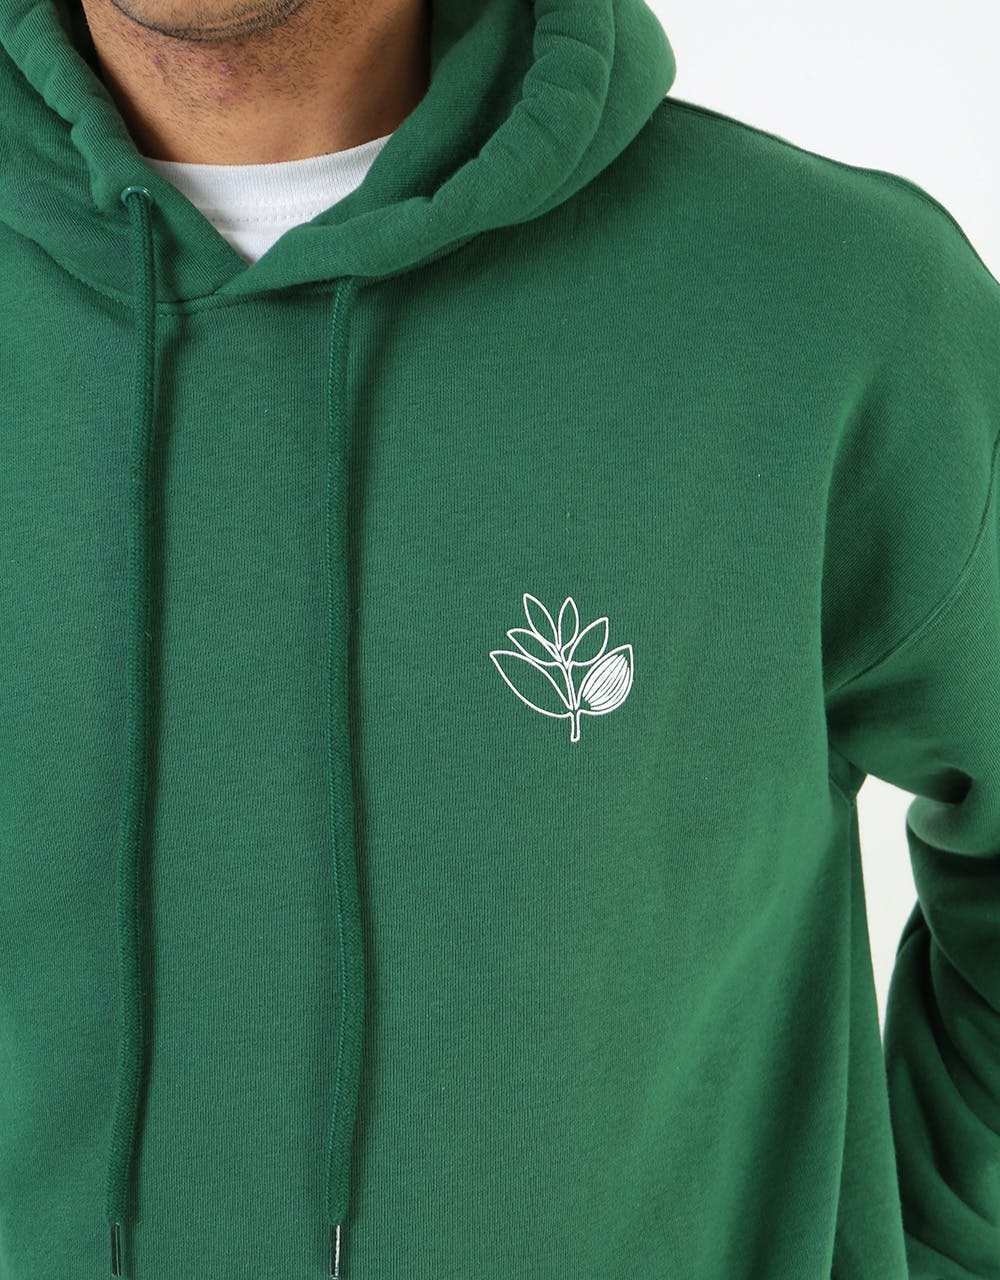 Magenta Outline Pullover Hoodie - Forest Green/White